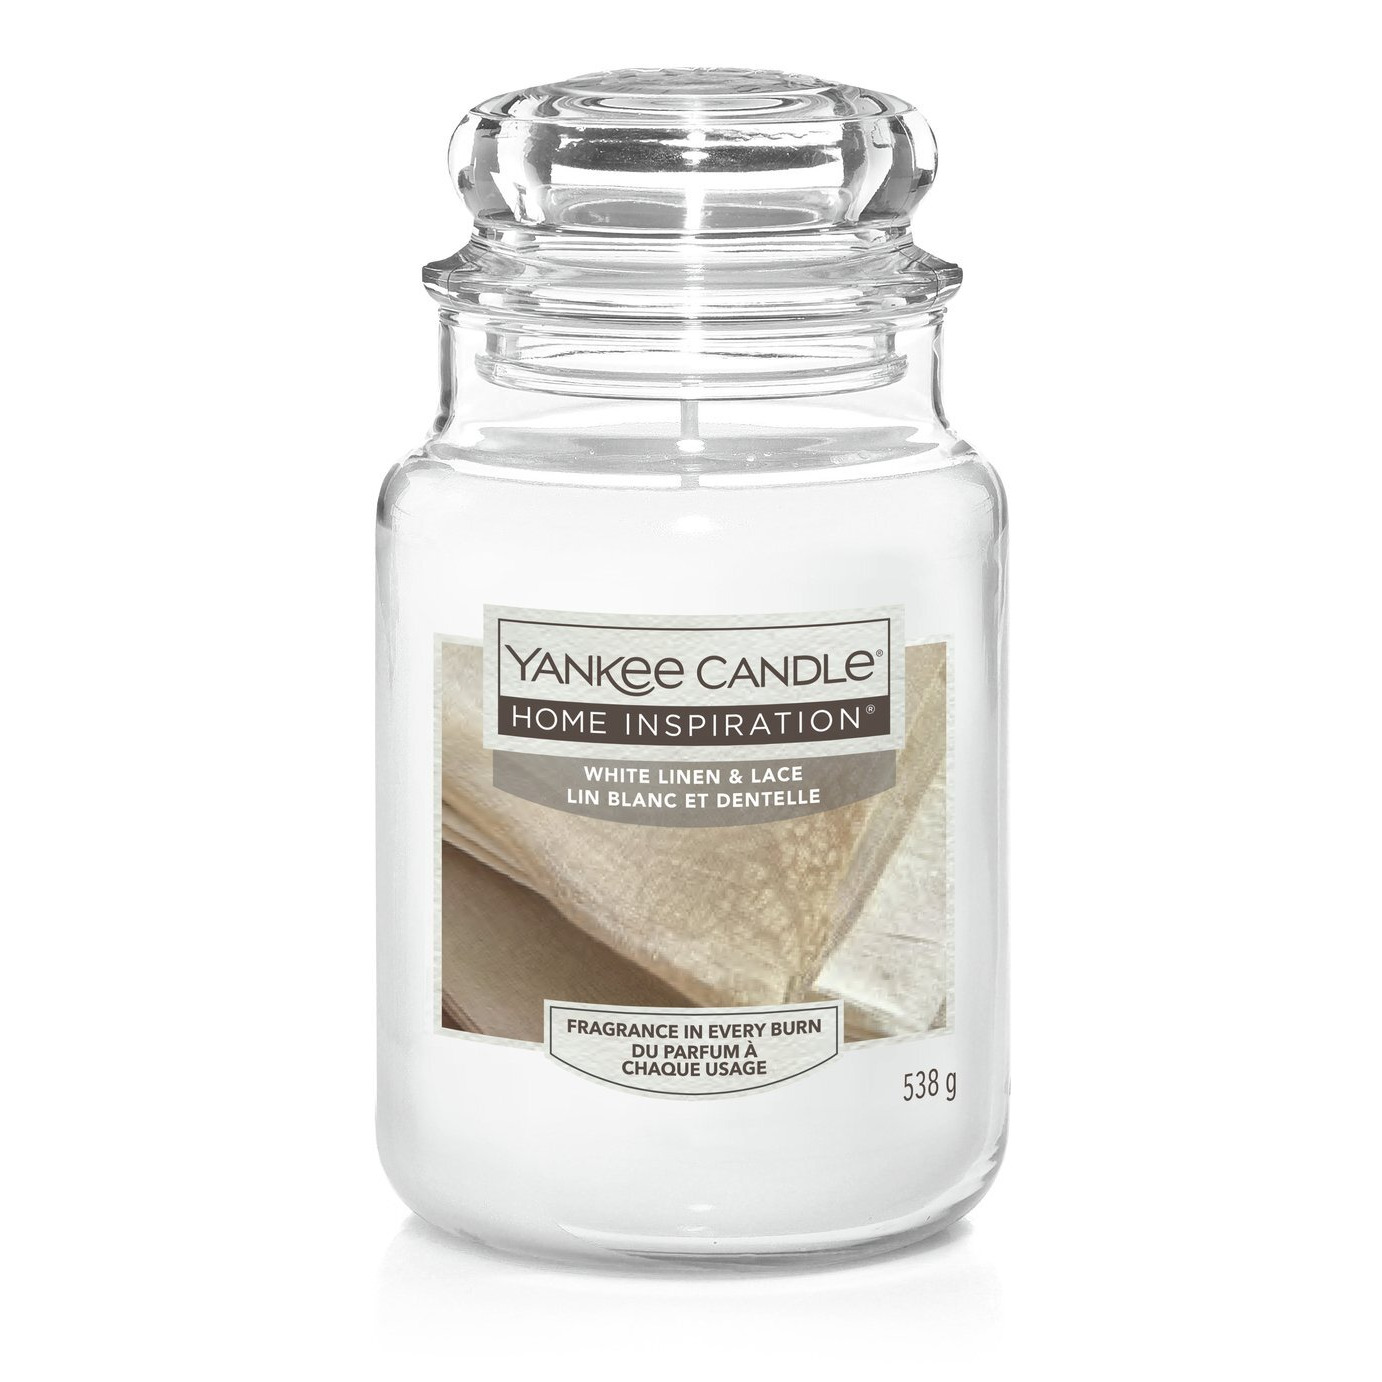 Yankee Home Inspiration Large Jar Candle -White Linen & Lace - image 1